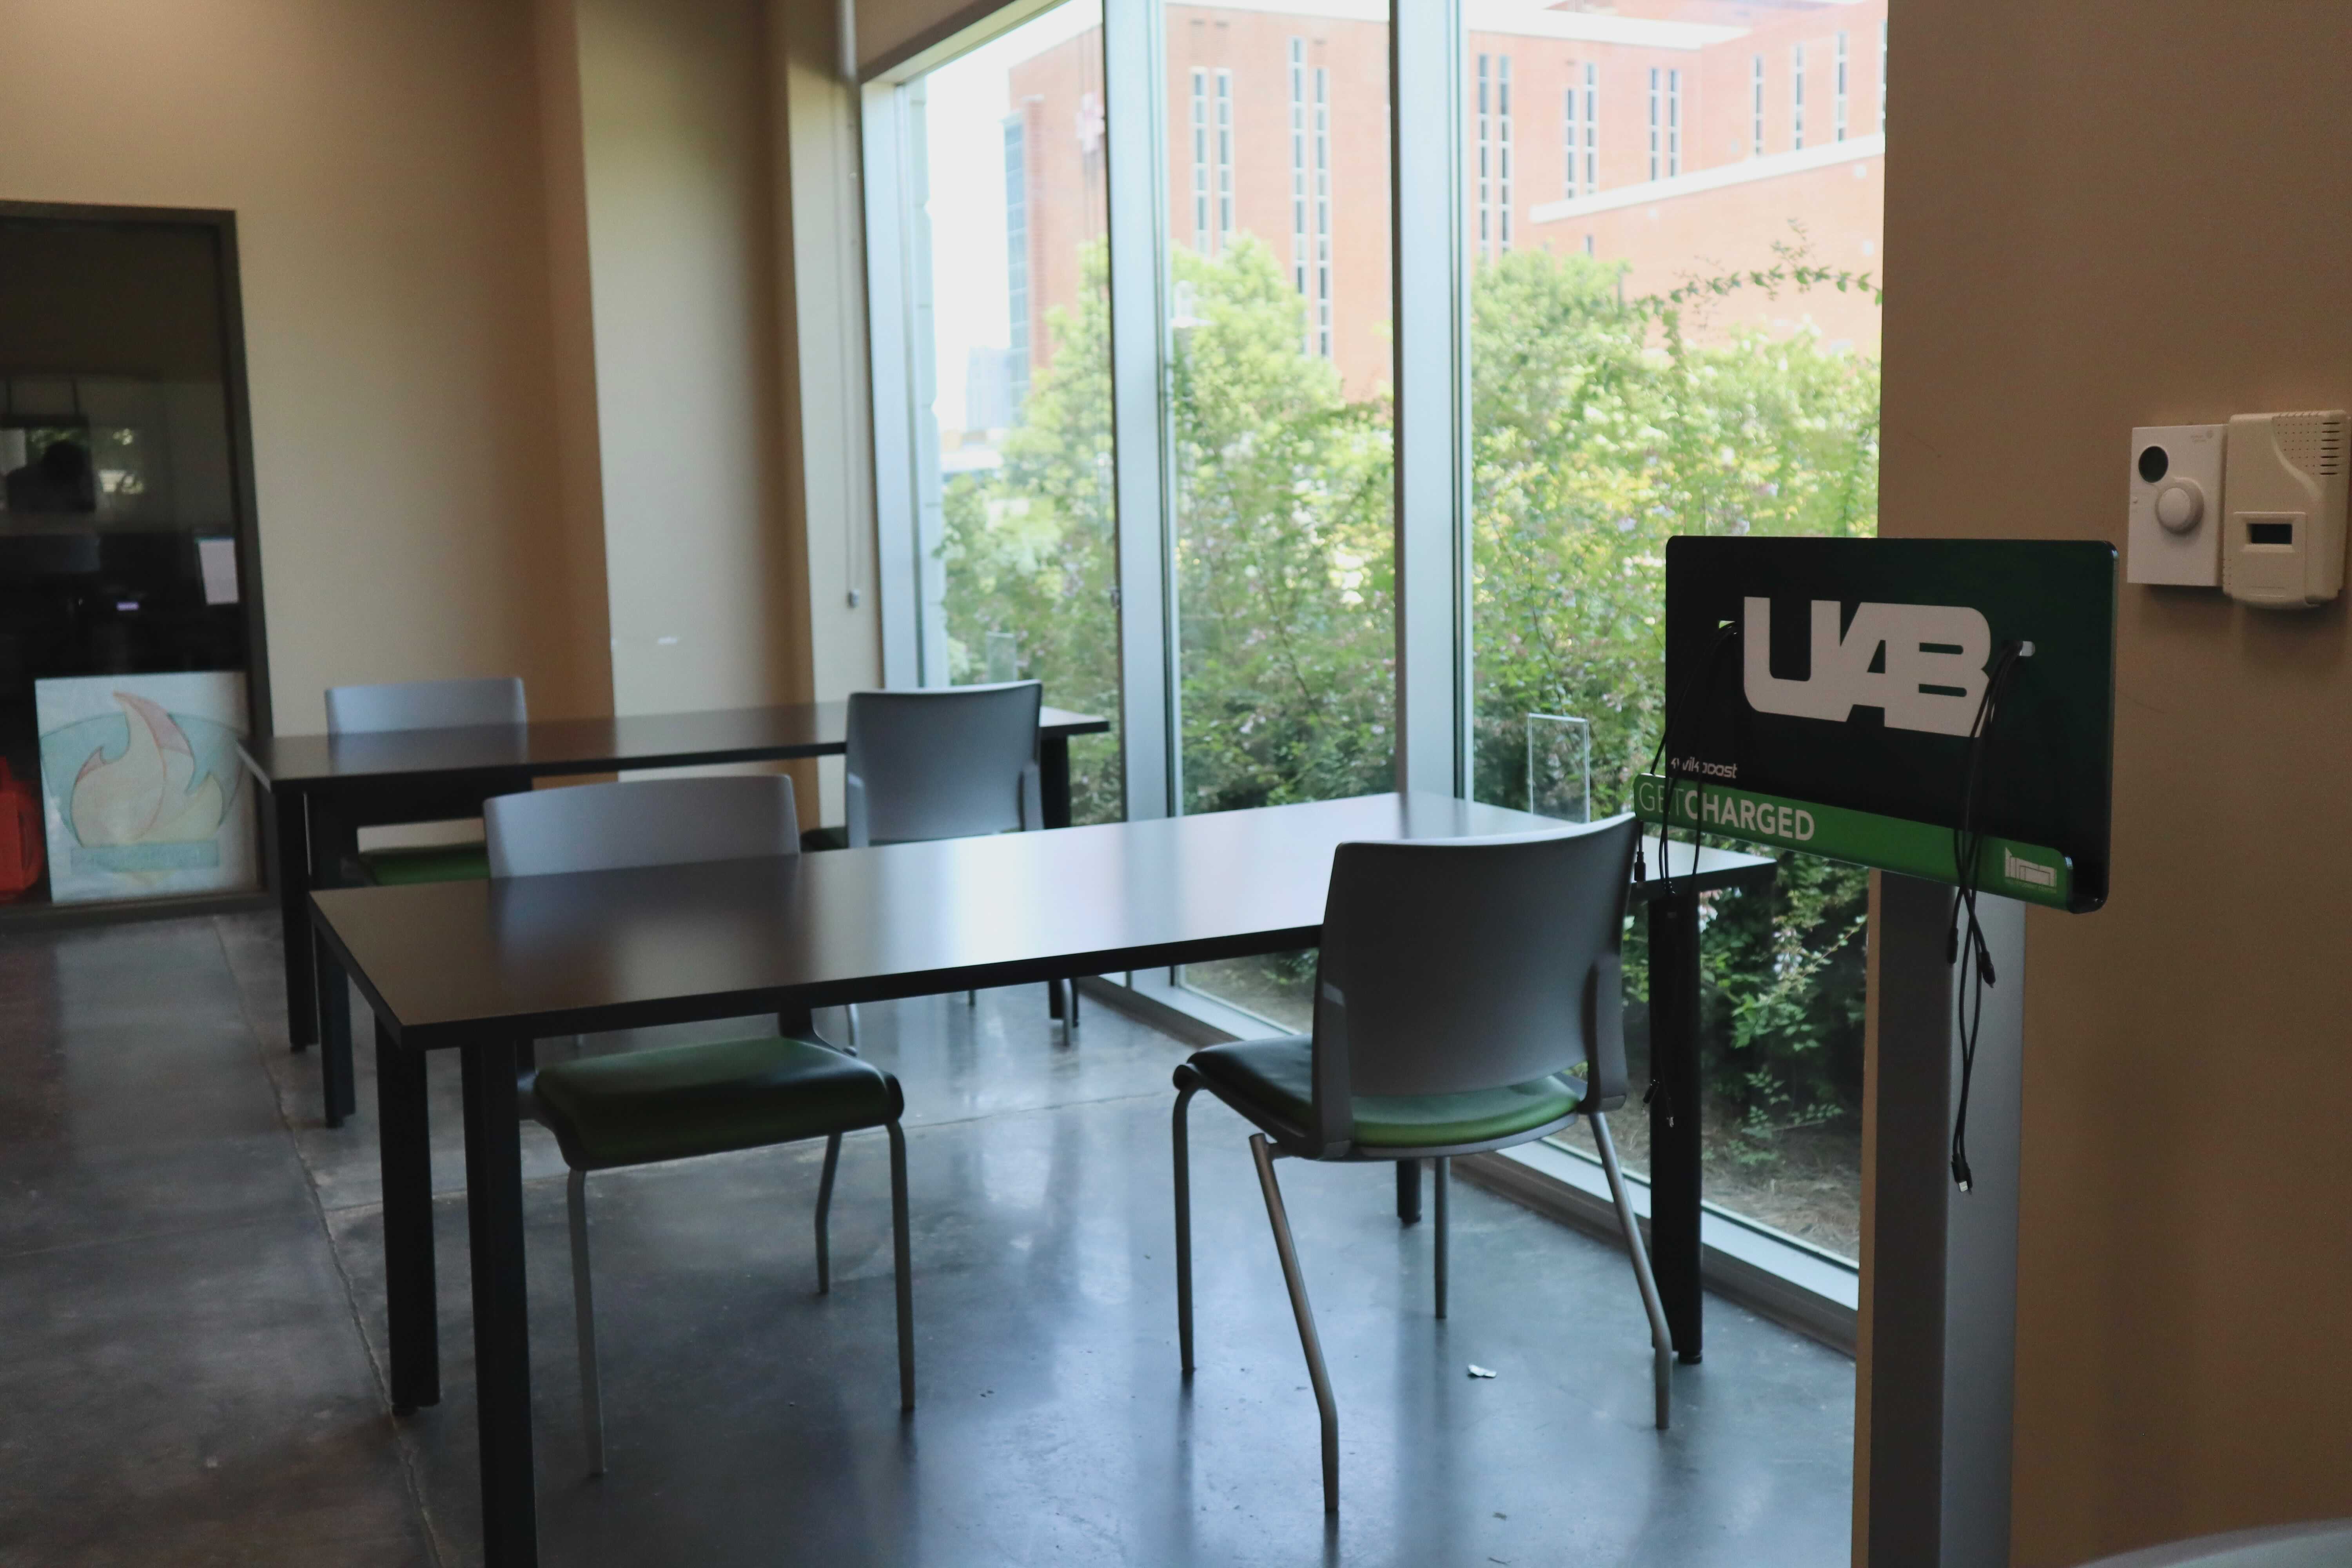 Off-Campus Student lounge, available tables and chairs along with charging station